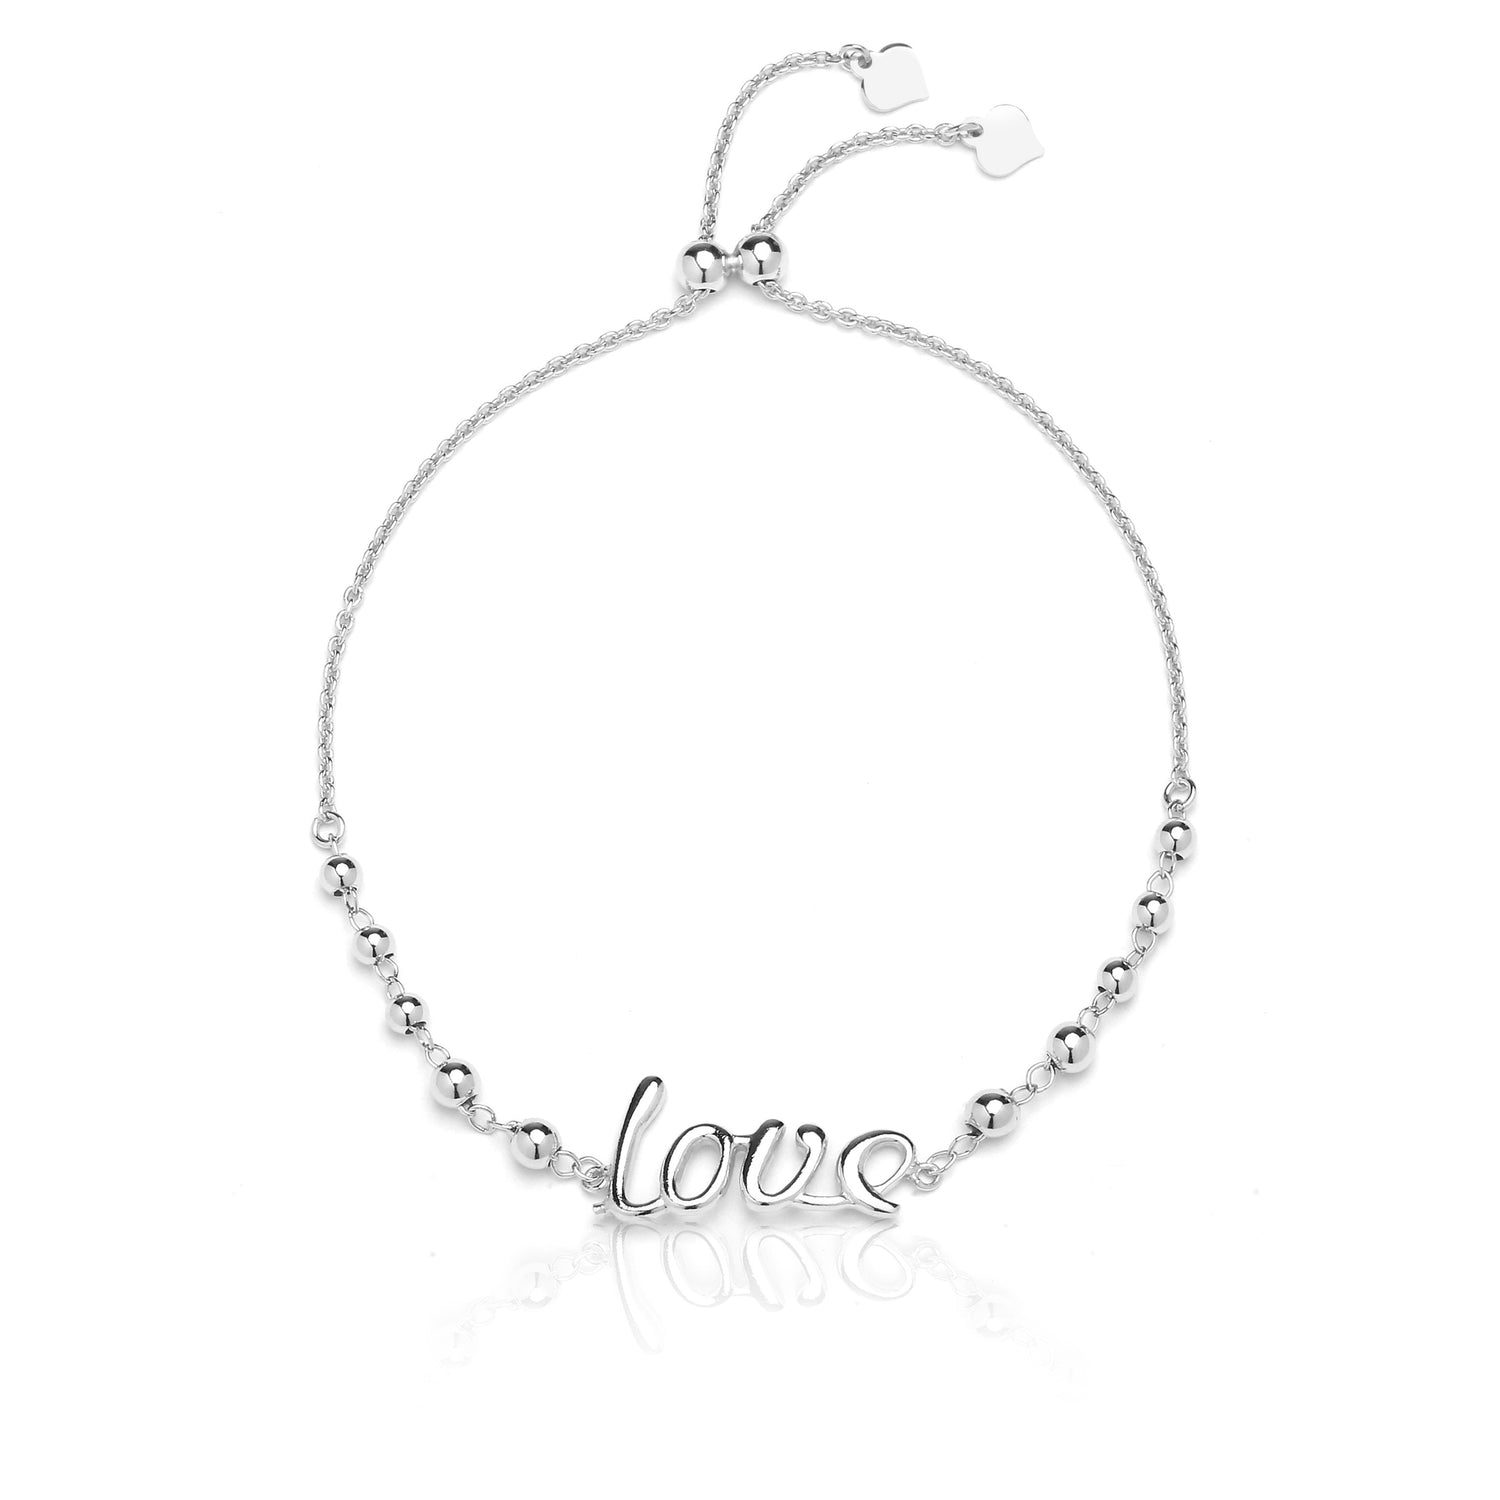 Sterling Silver Adjustable Love Bracelet with Beads, Expandable 9 Inch